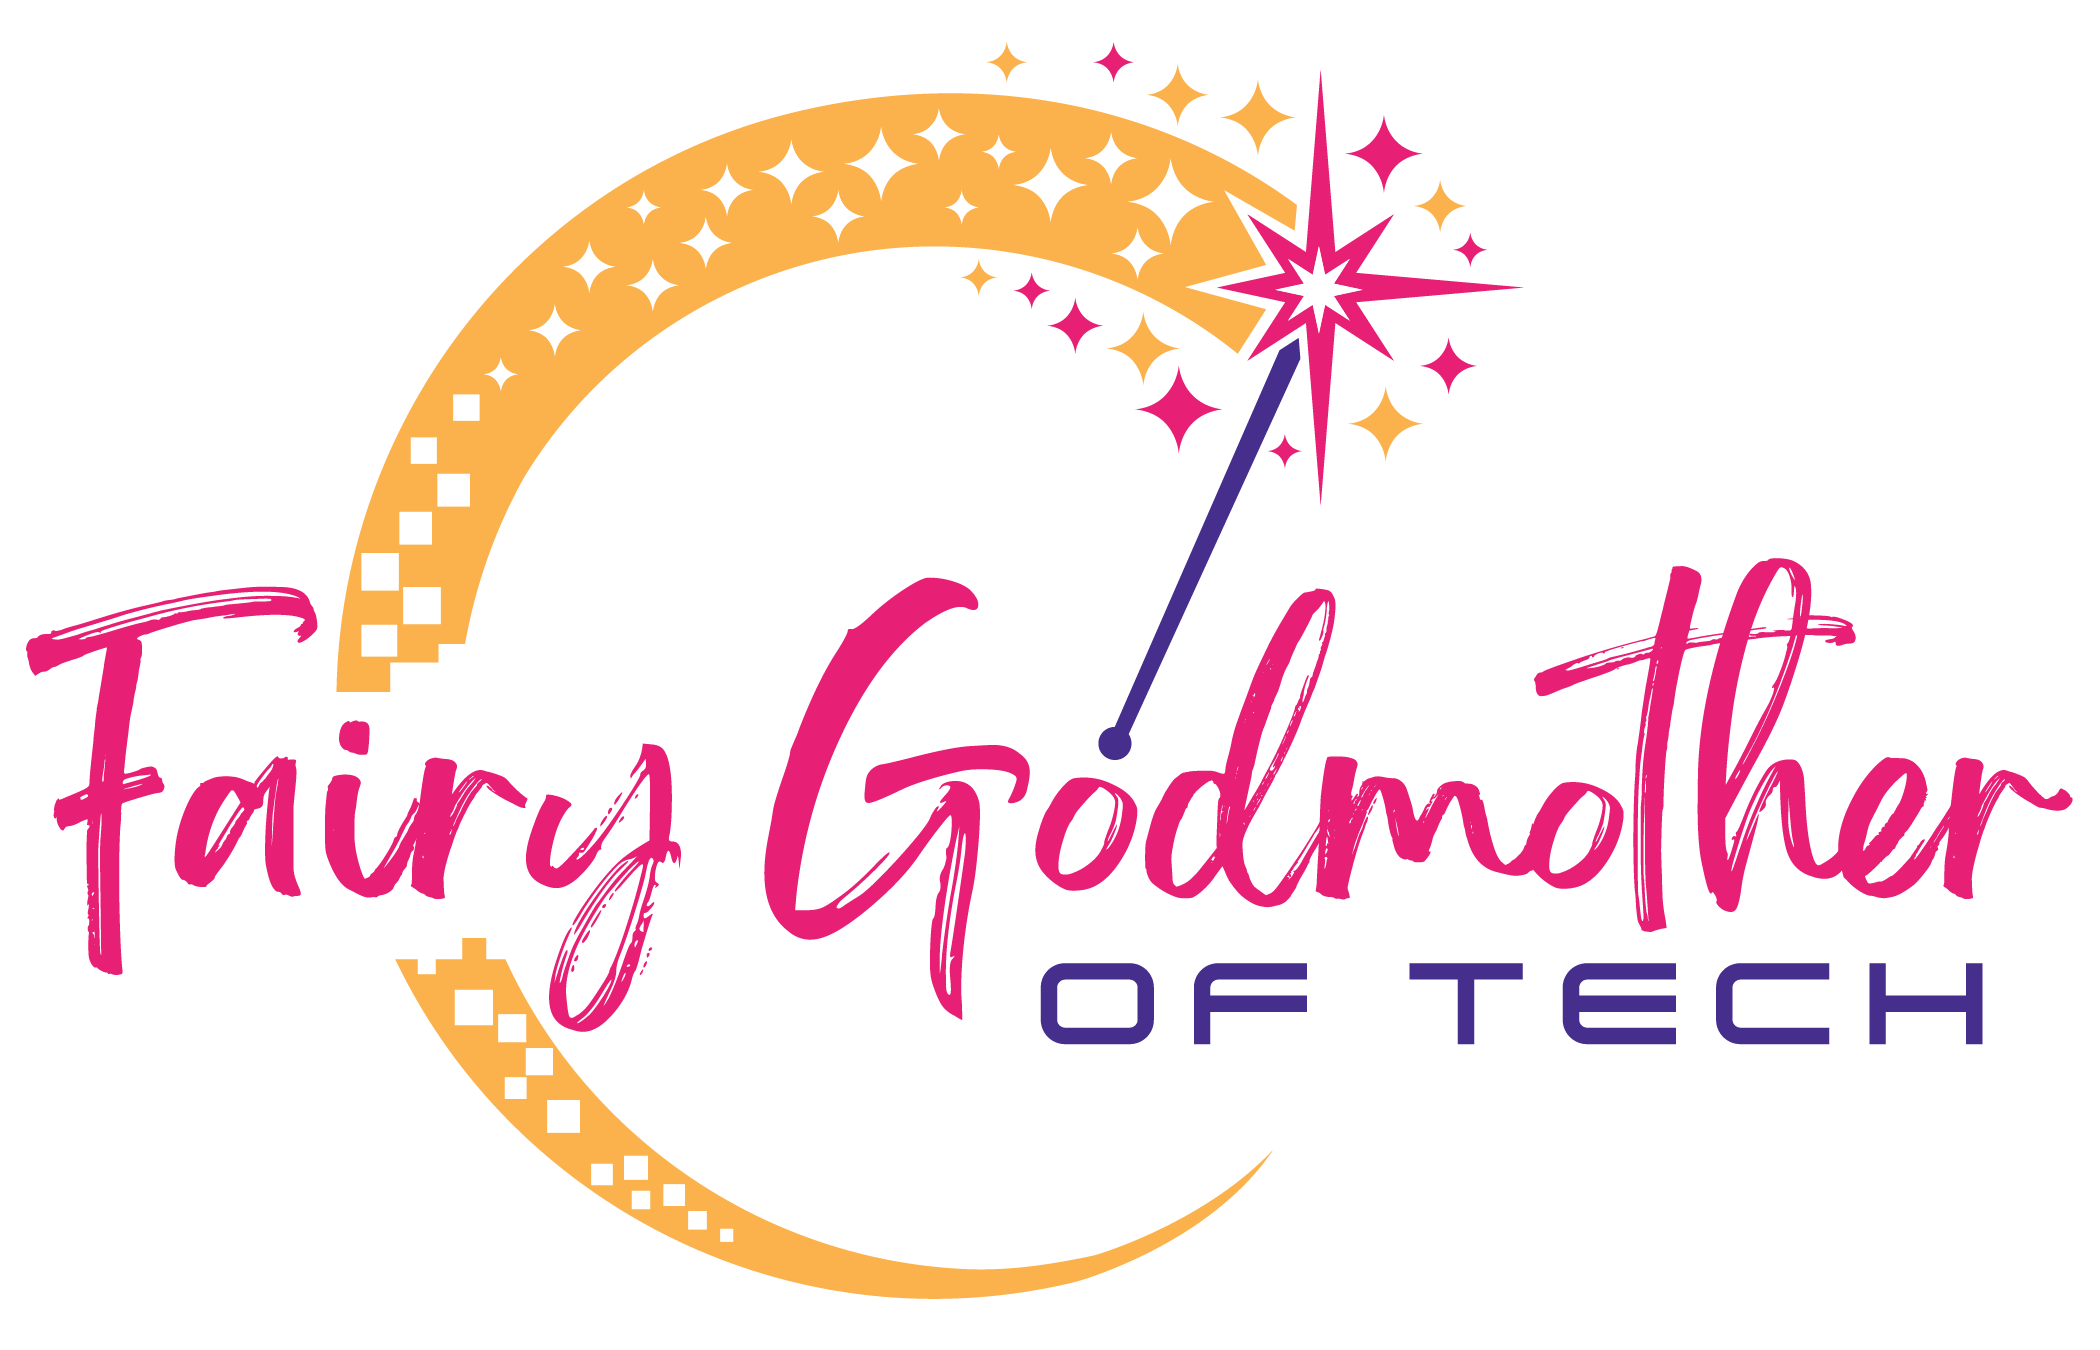 Fairy Godmother of Tech